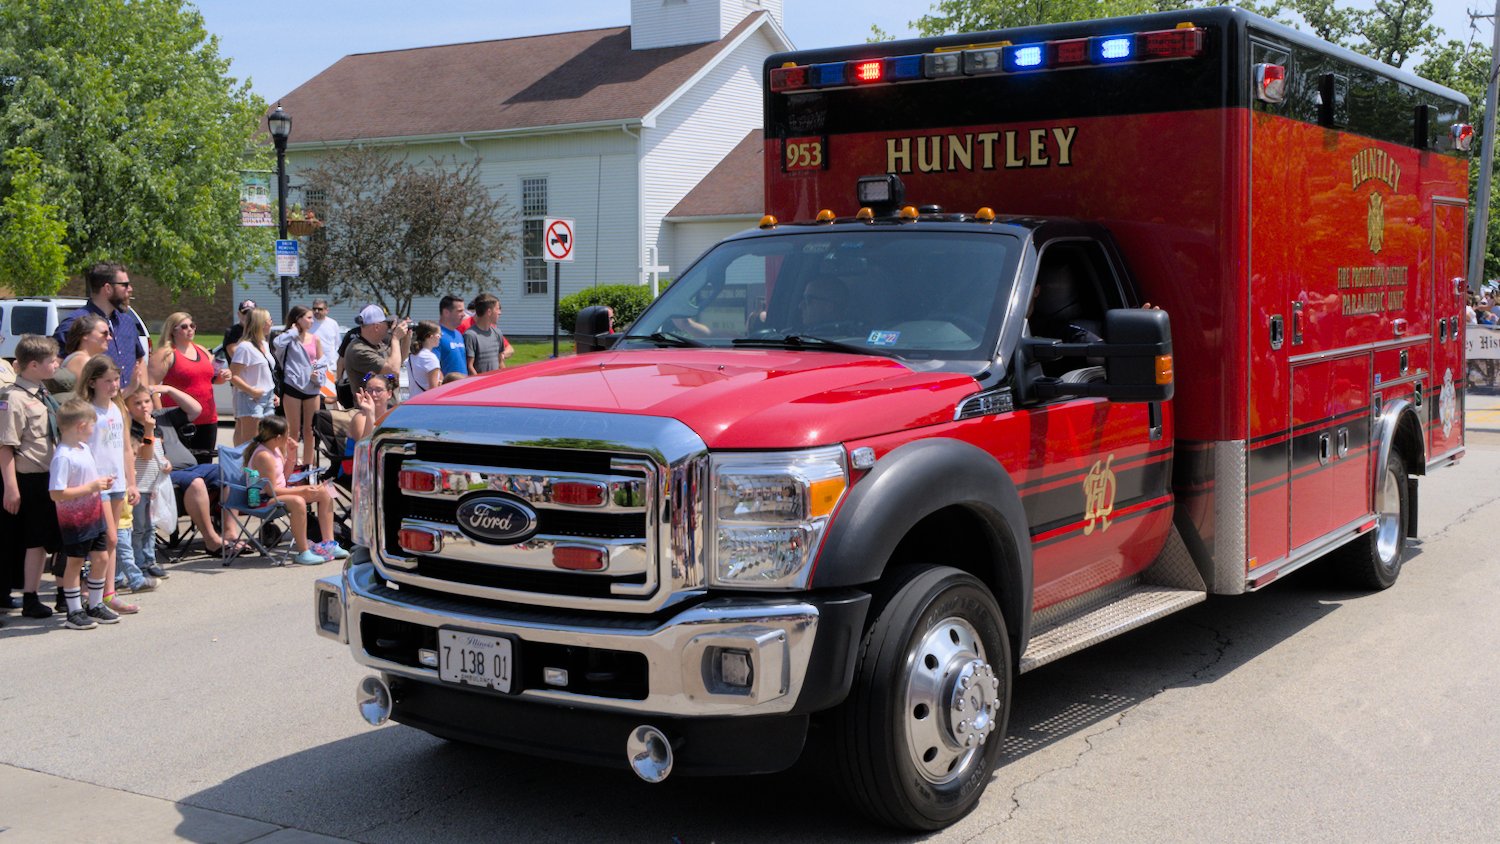 Huntley Fire Protection District paramedic unit.